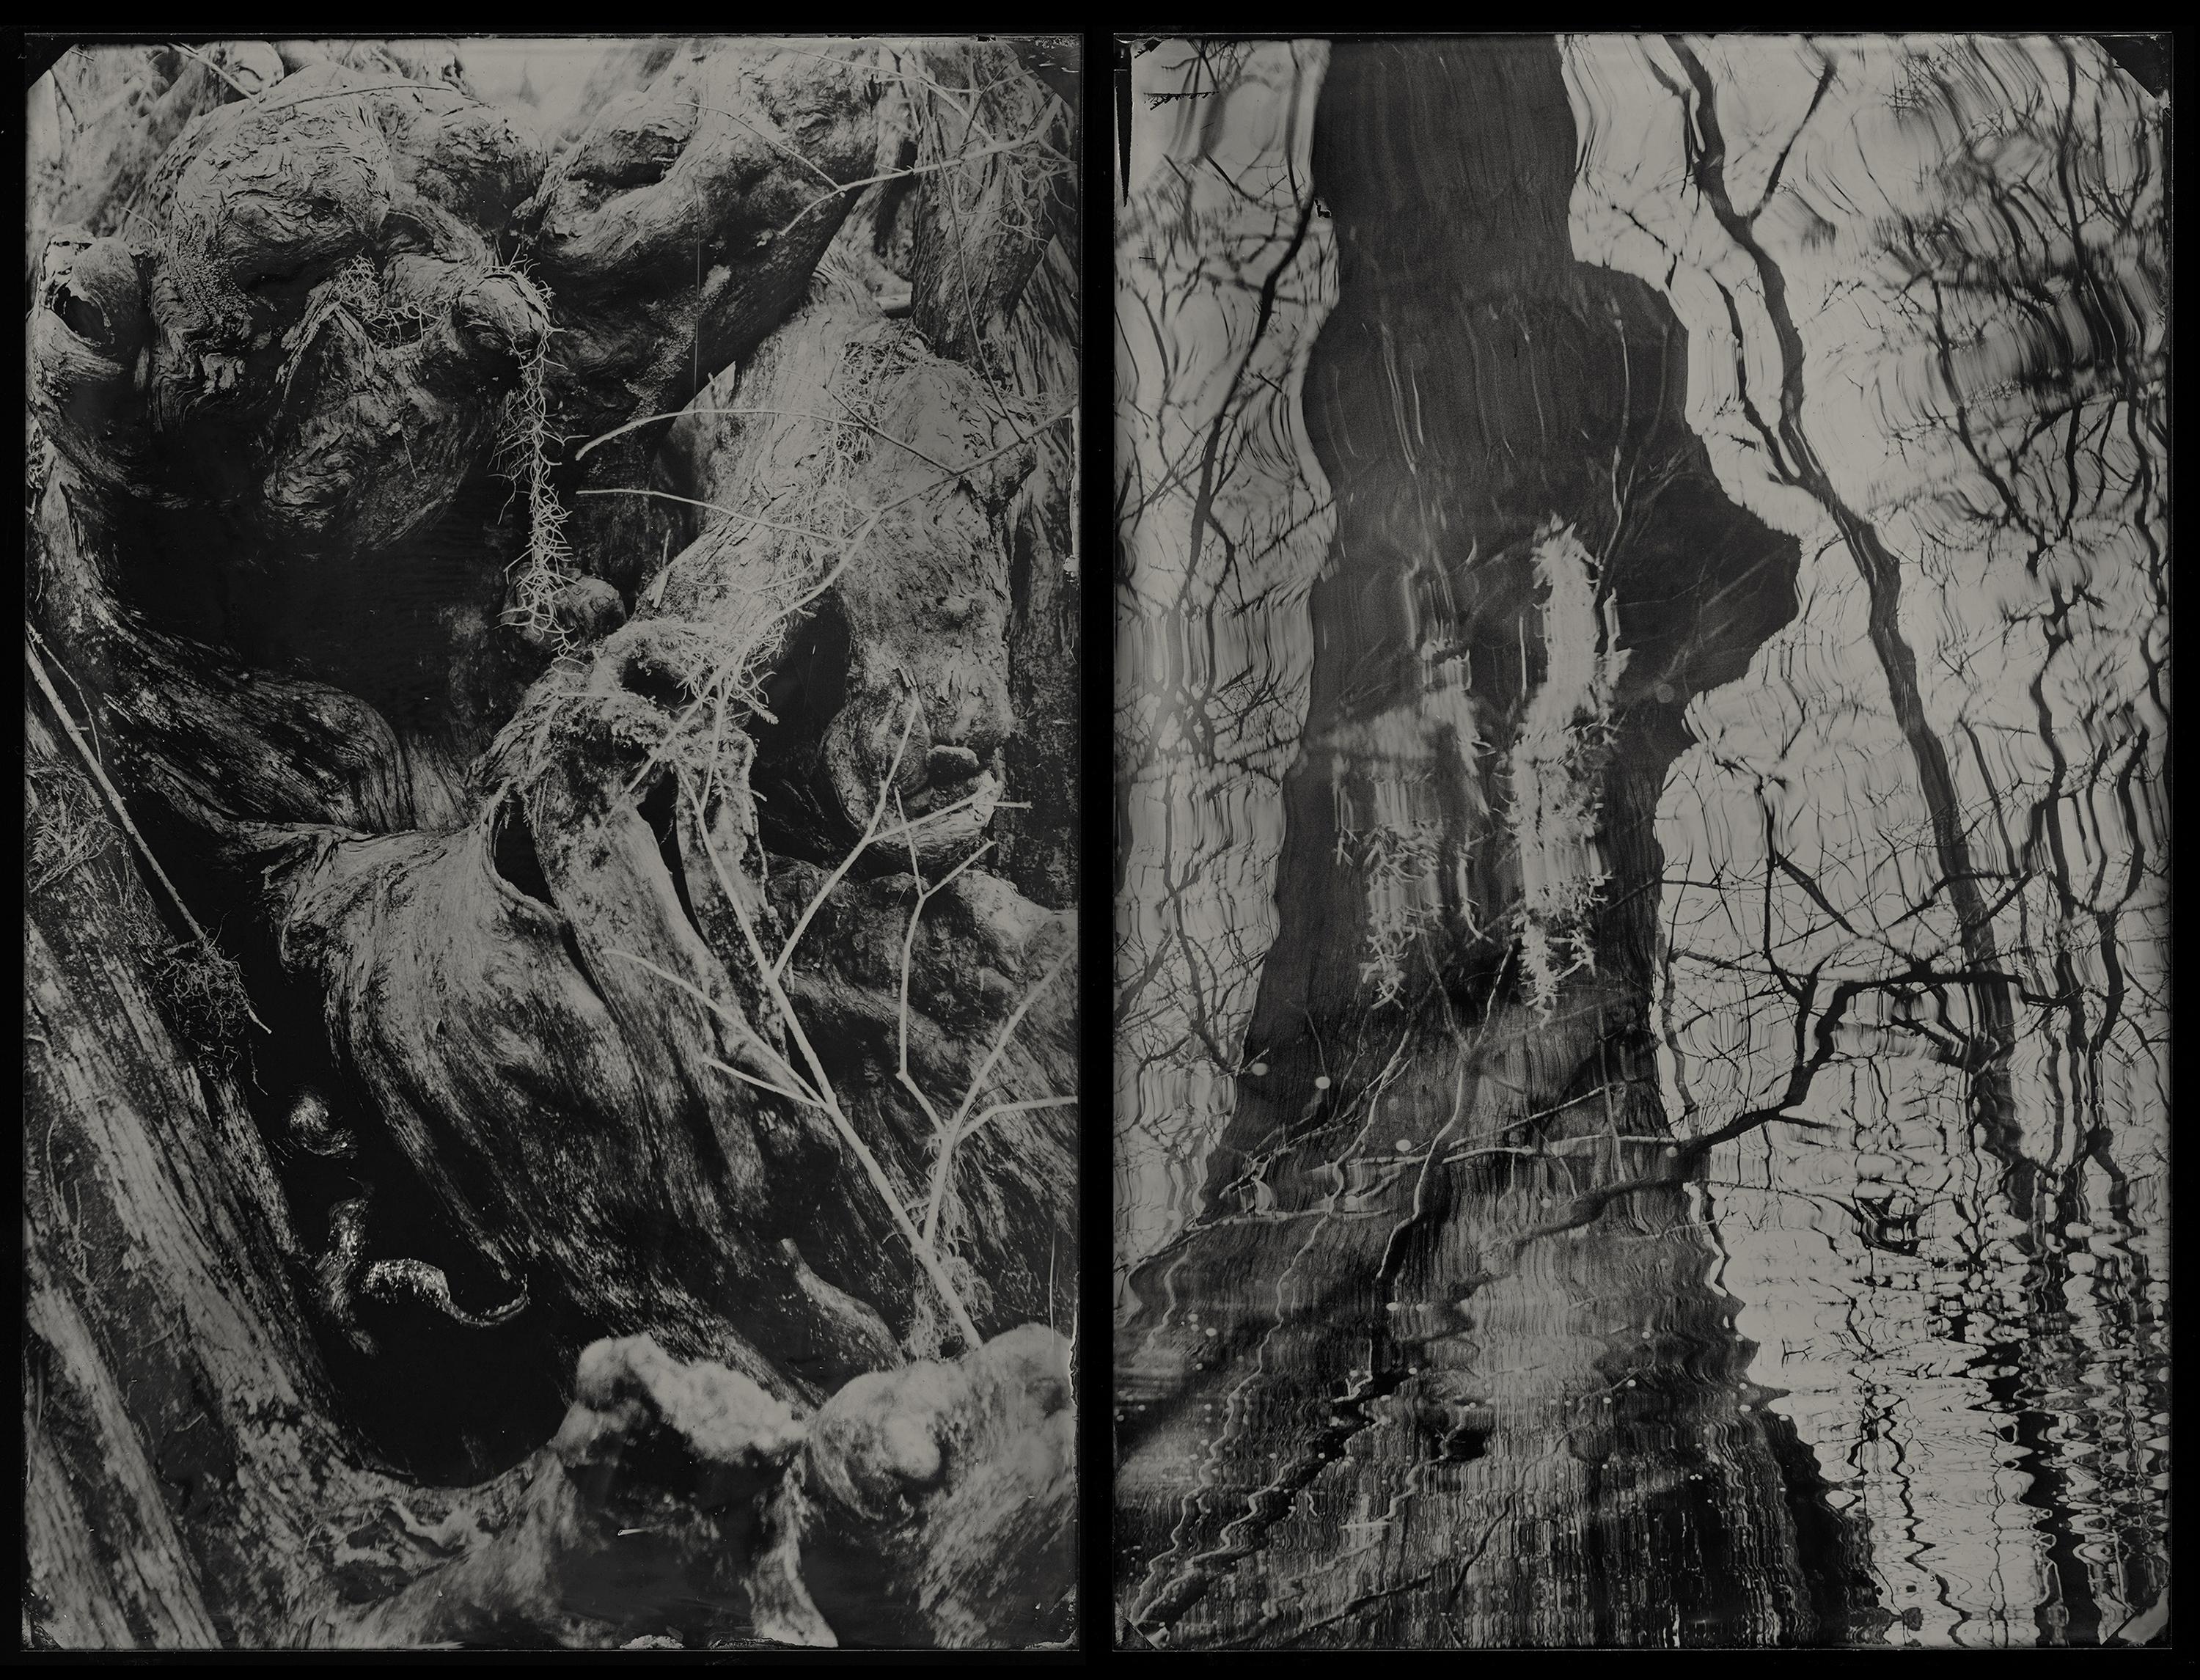 Crossing Ebenezer - wet plate collodion - naturalism - landscape photography - Photograph by Cecilia Montalvo & Charlie McCullers